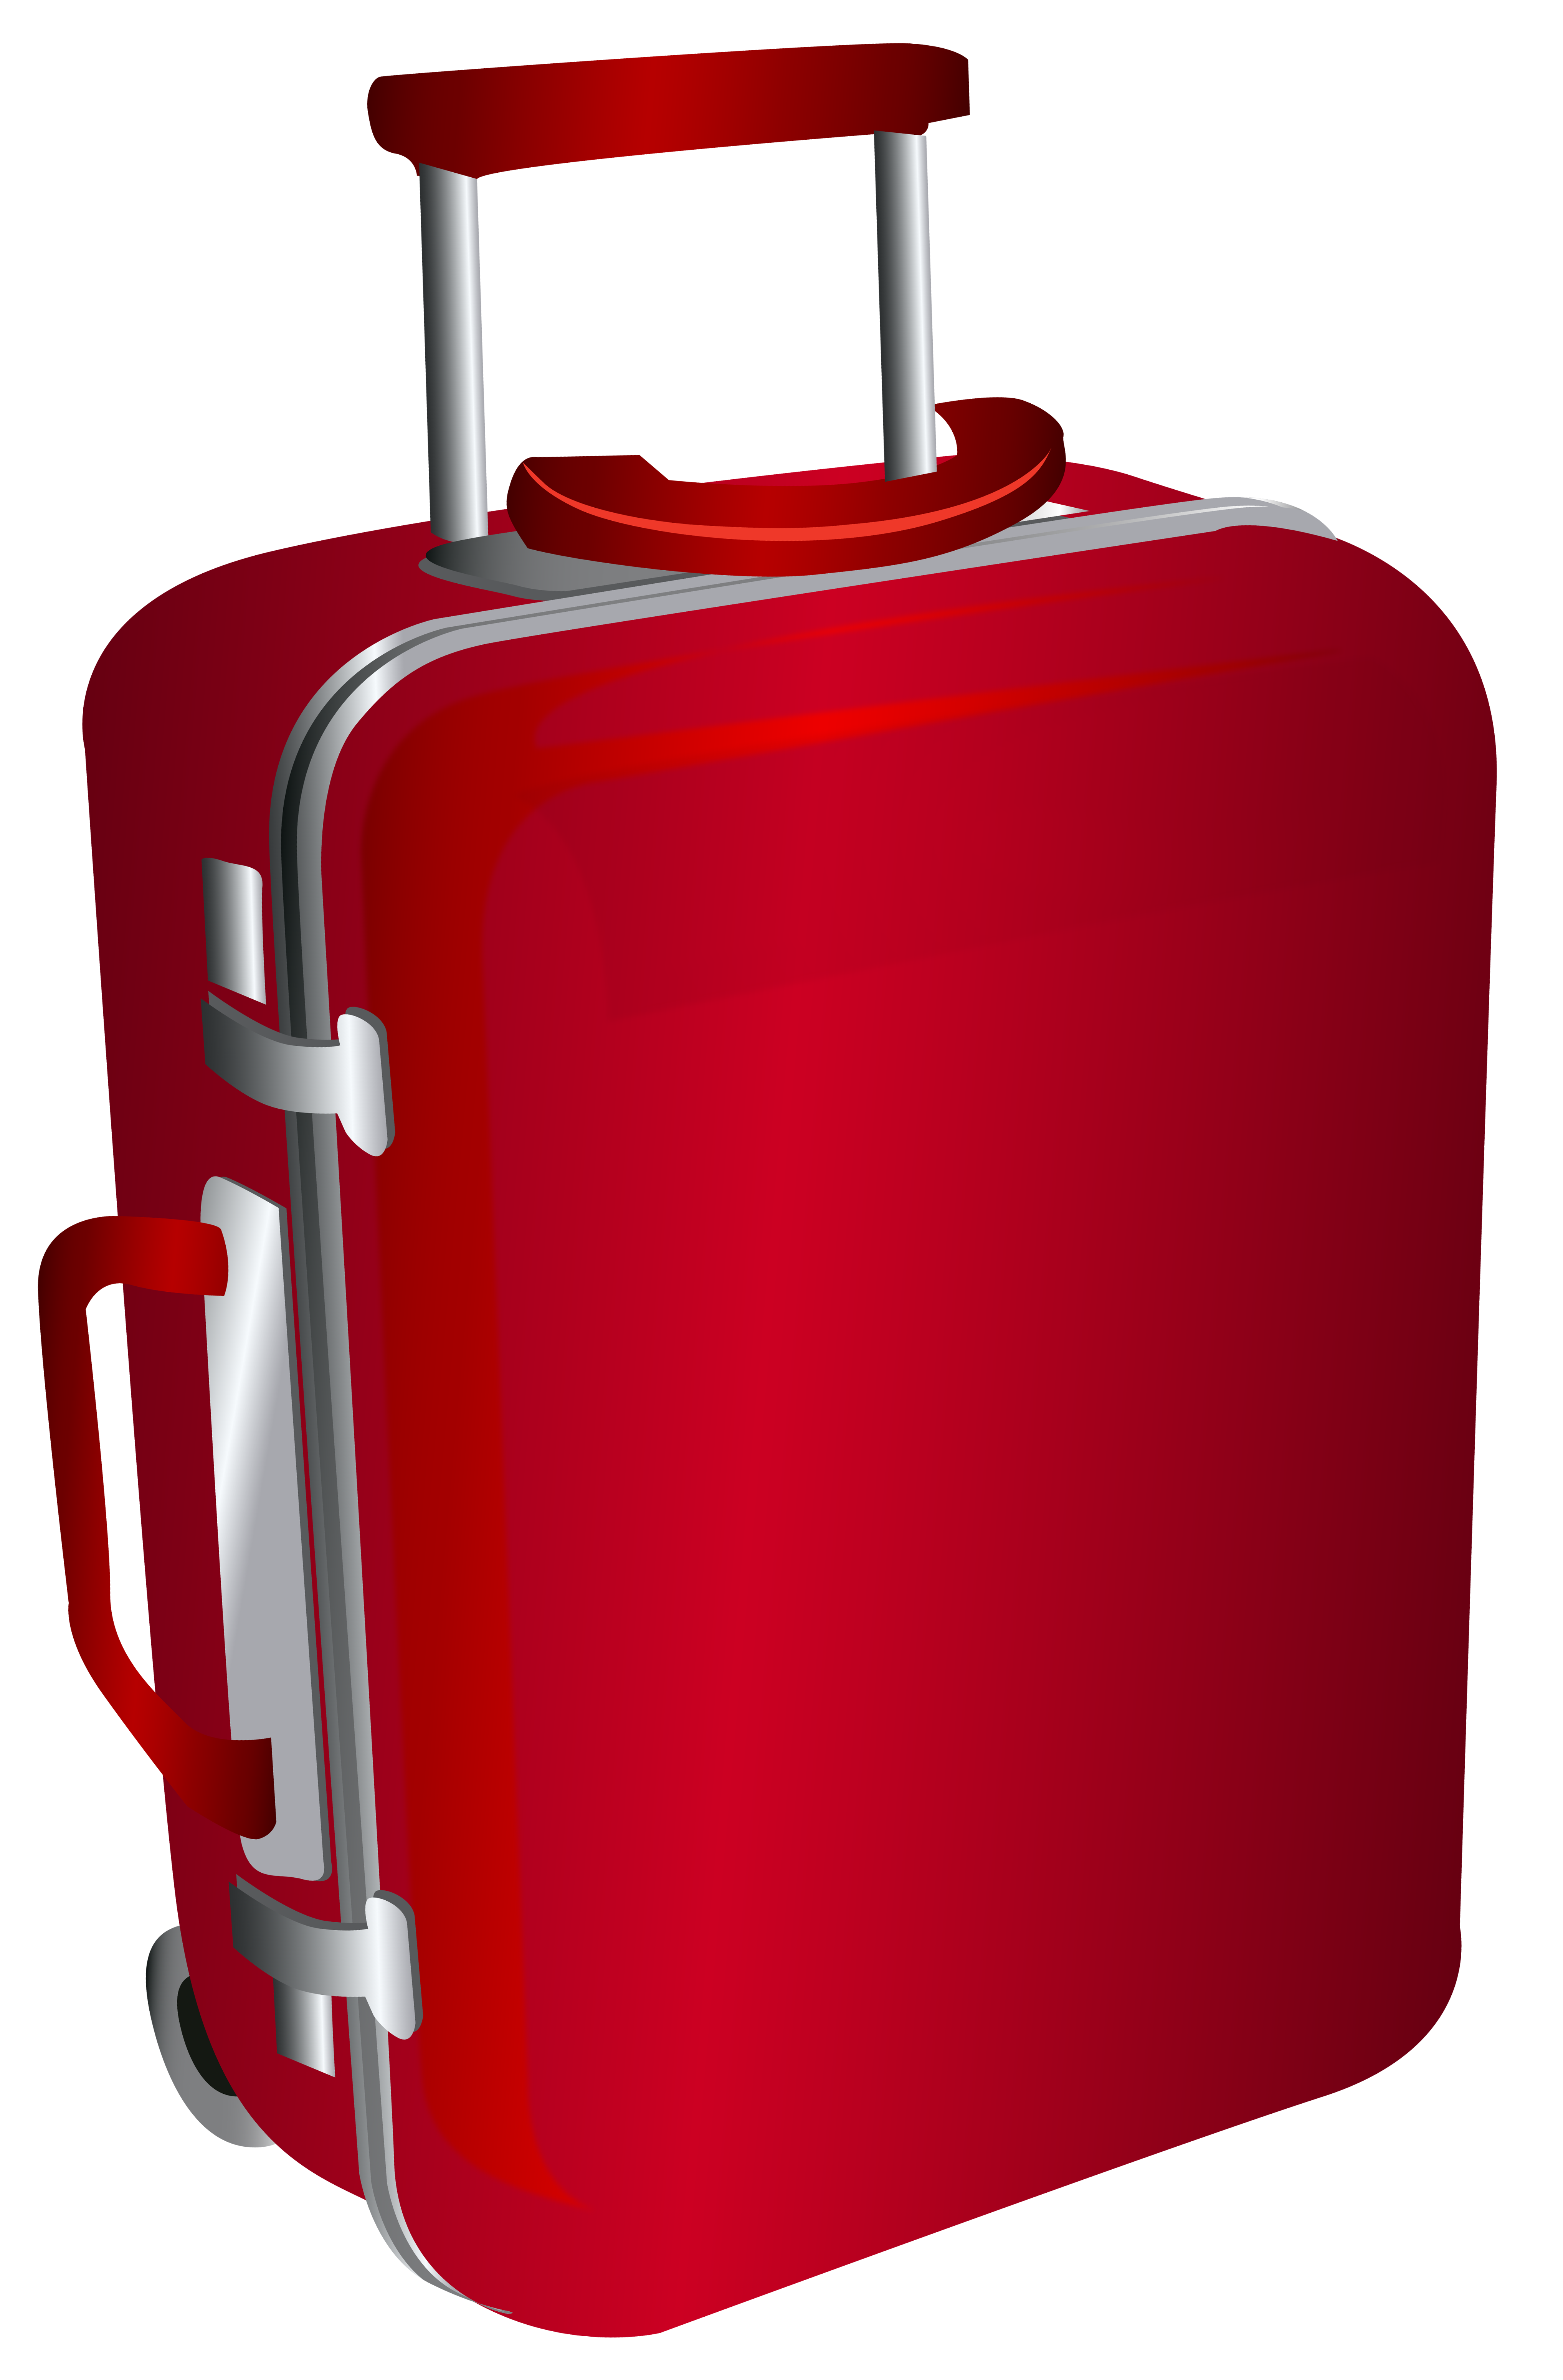 Red Trolley Travel Bag PNG Clipart Image 